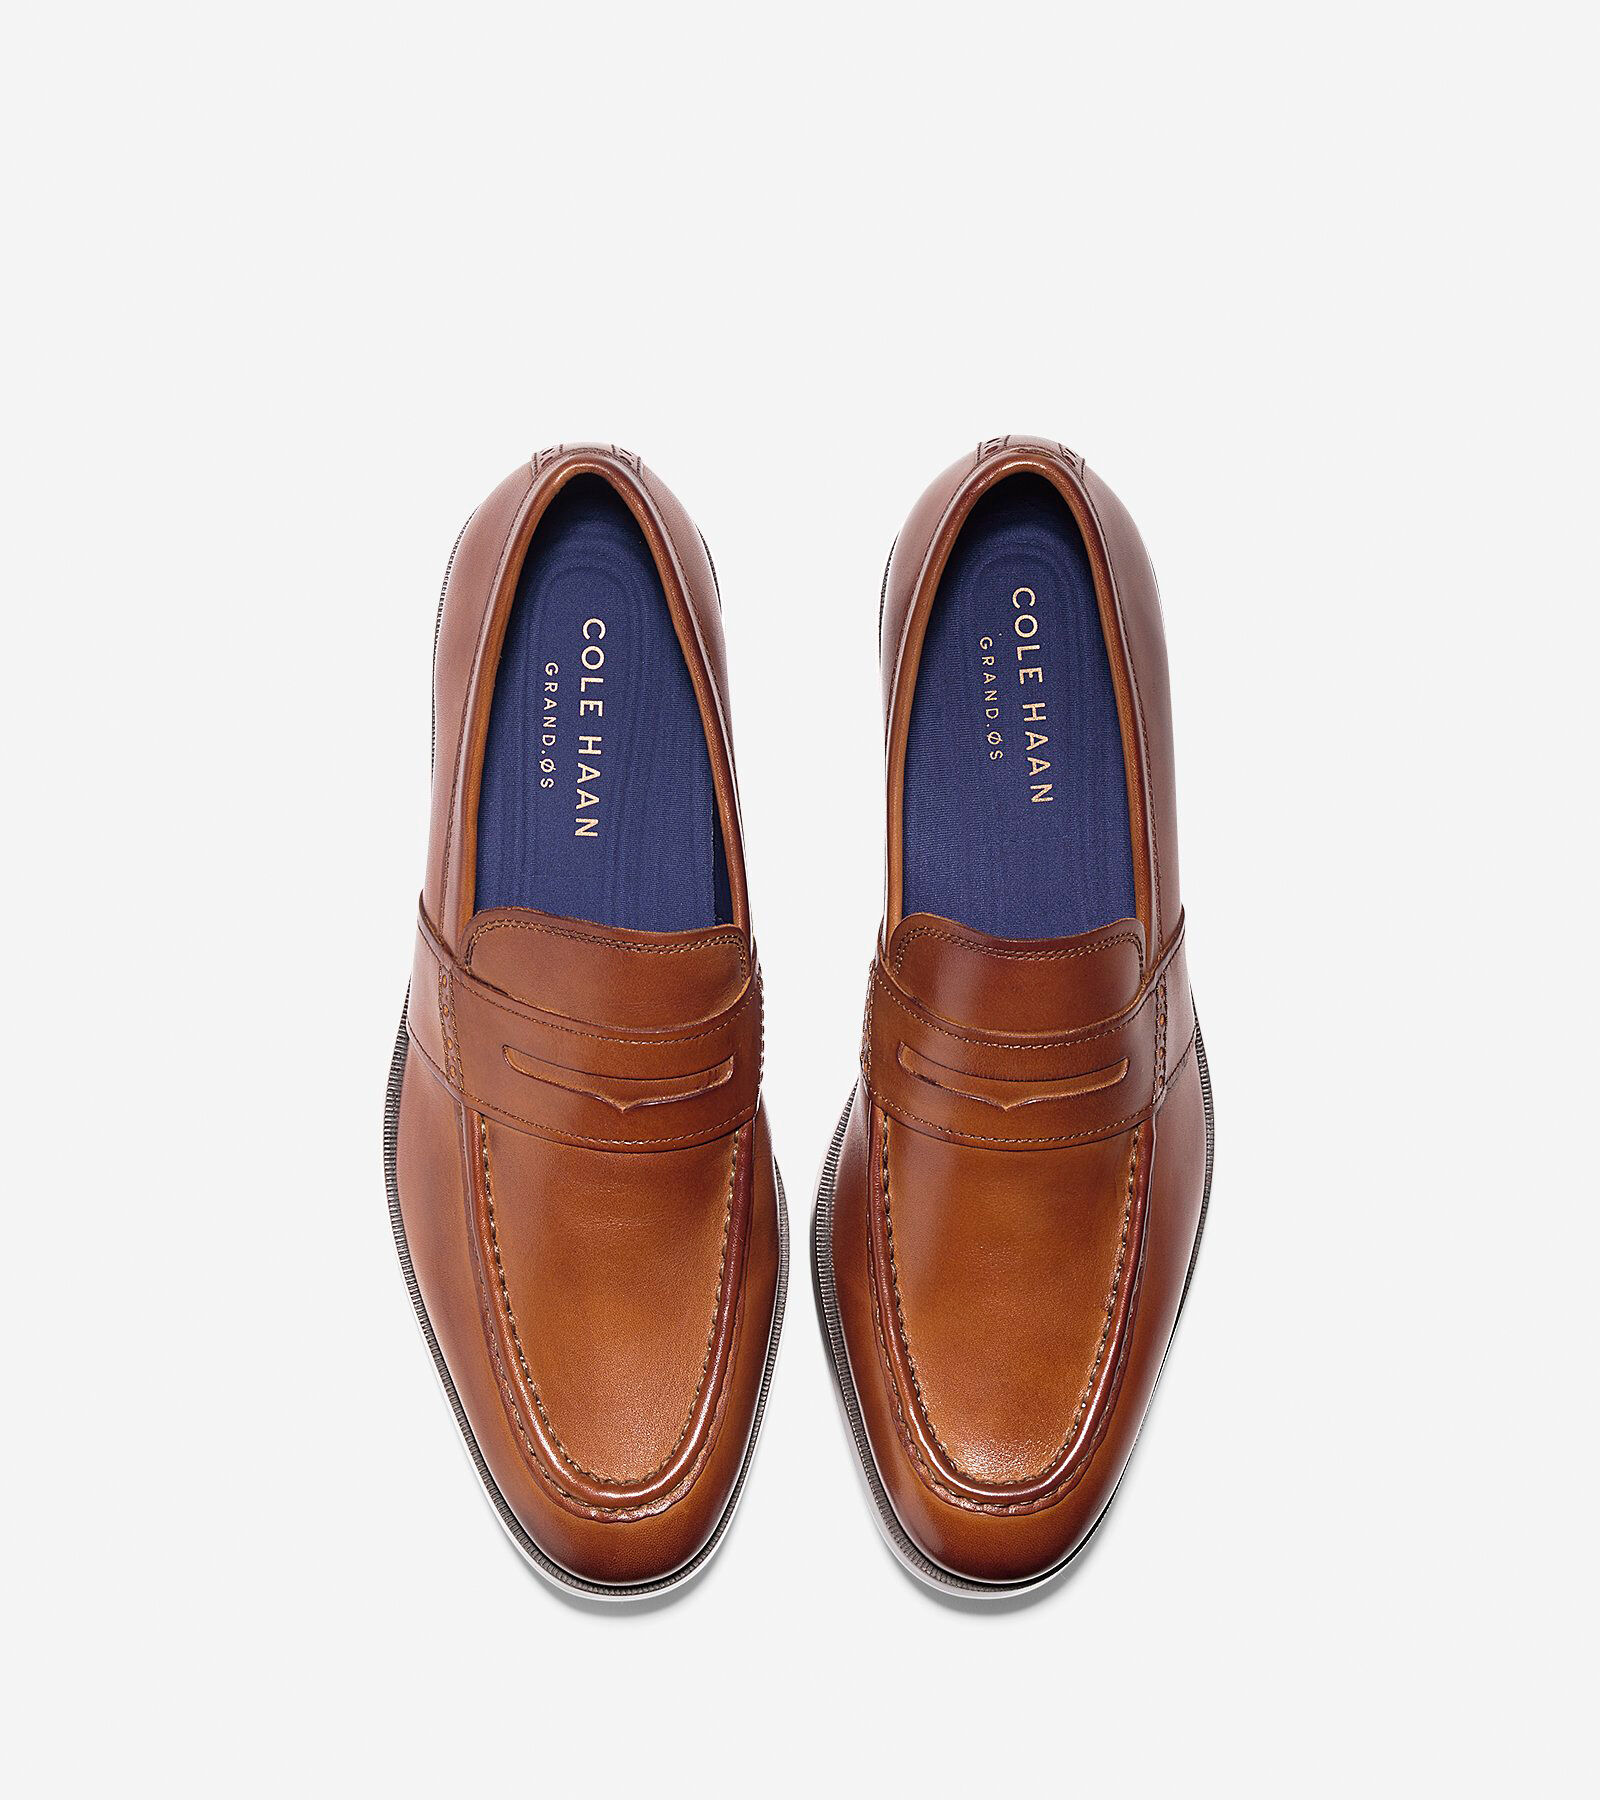 cole haan penny loafers